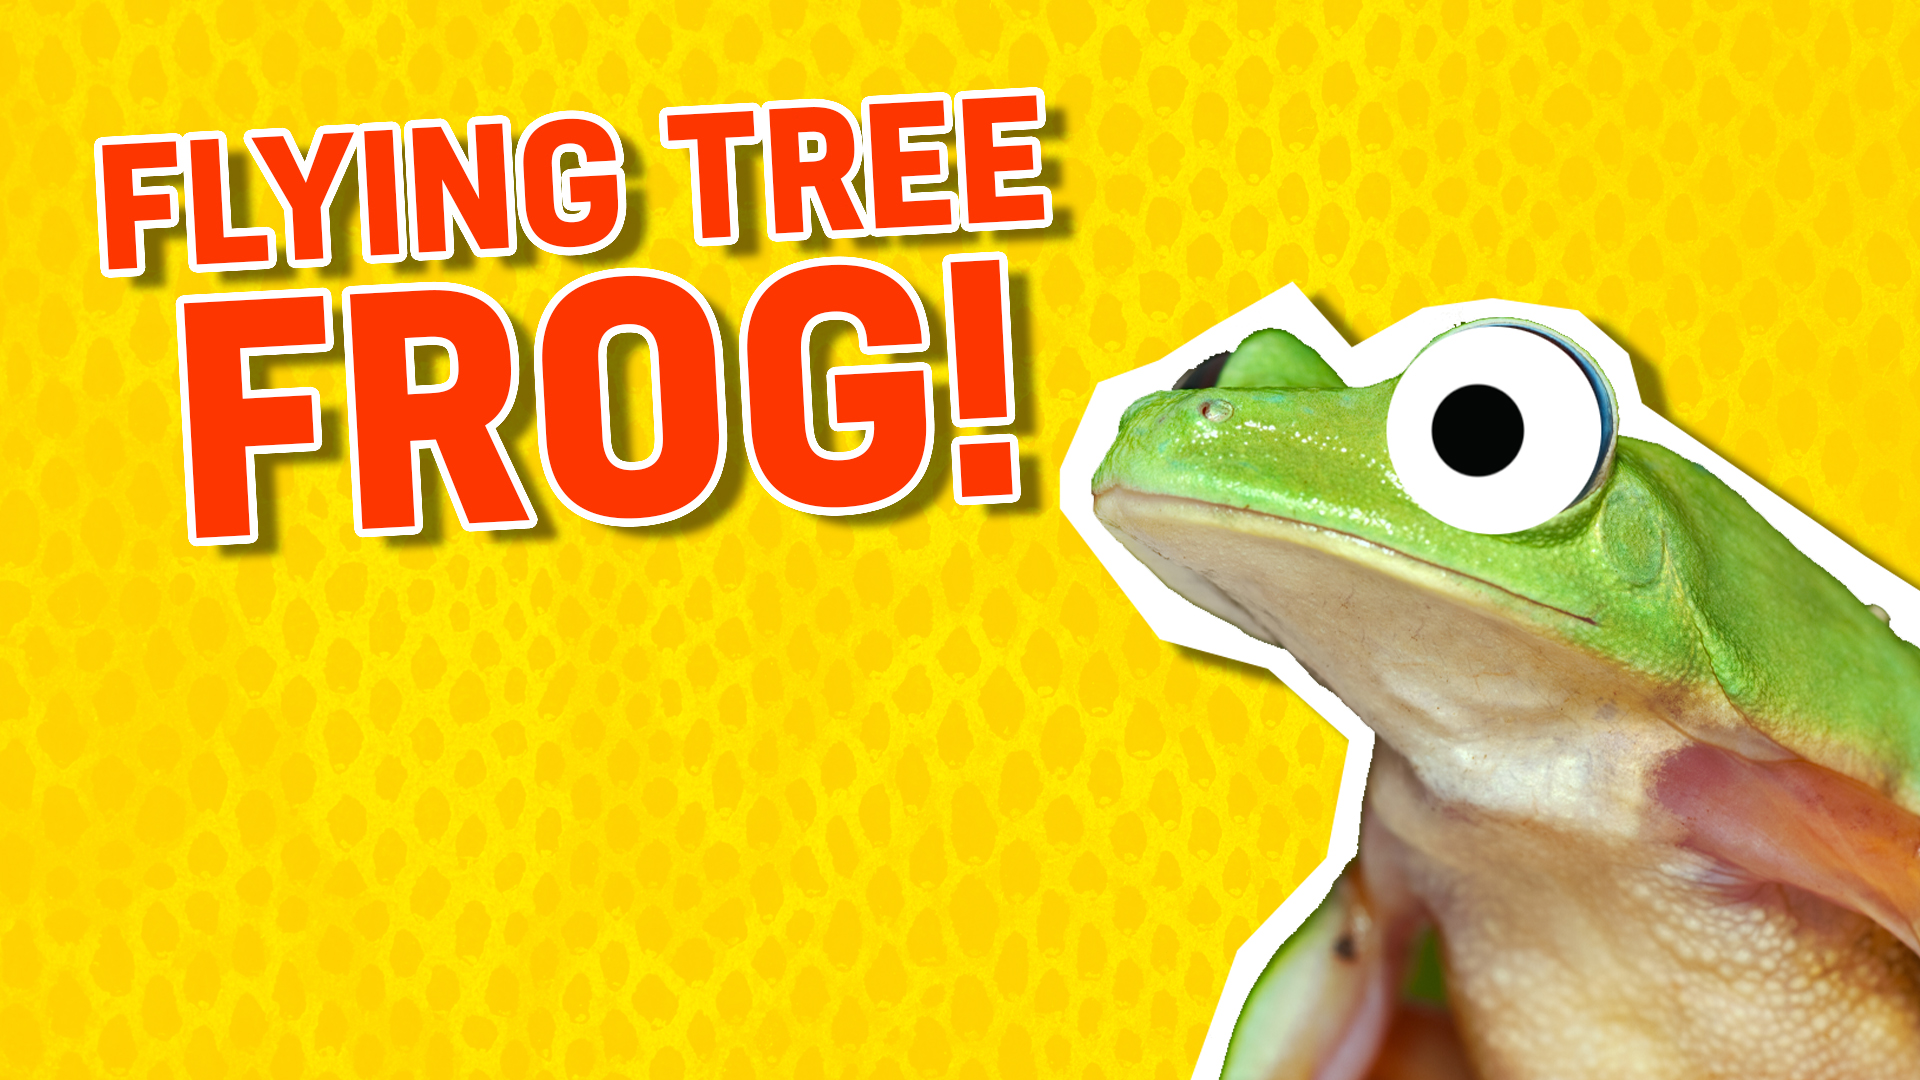 A flying tree frog